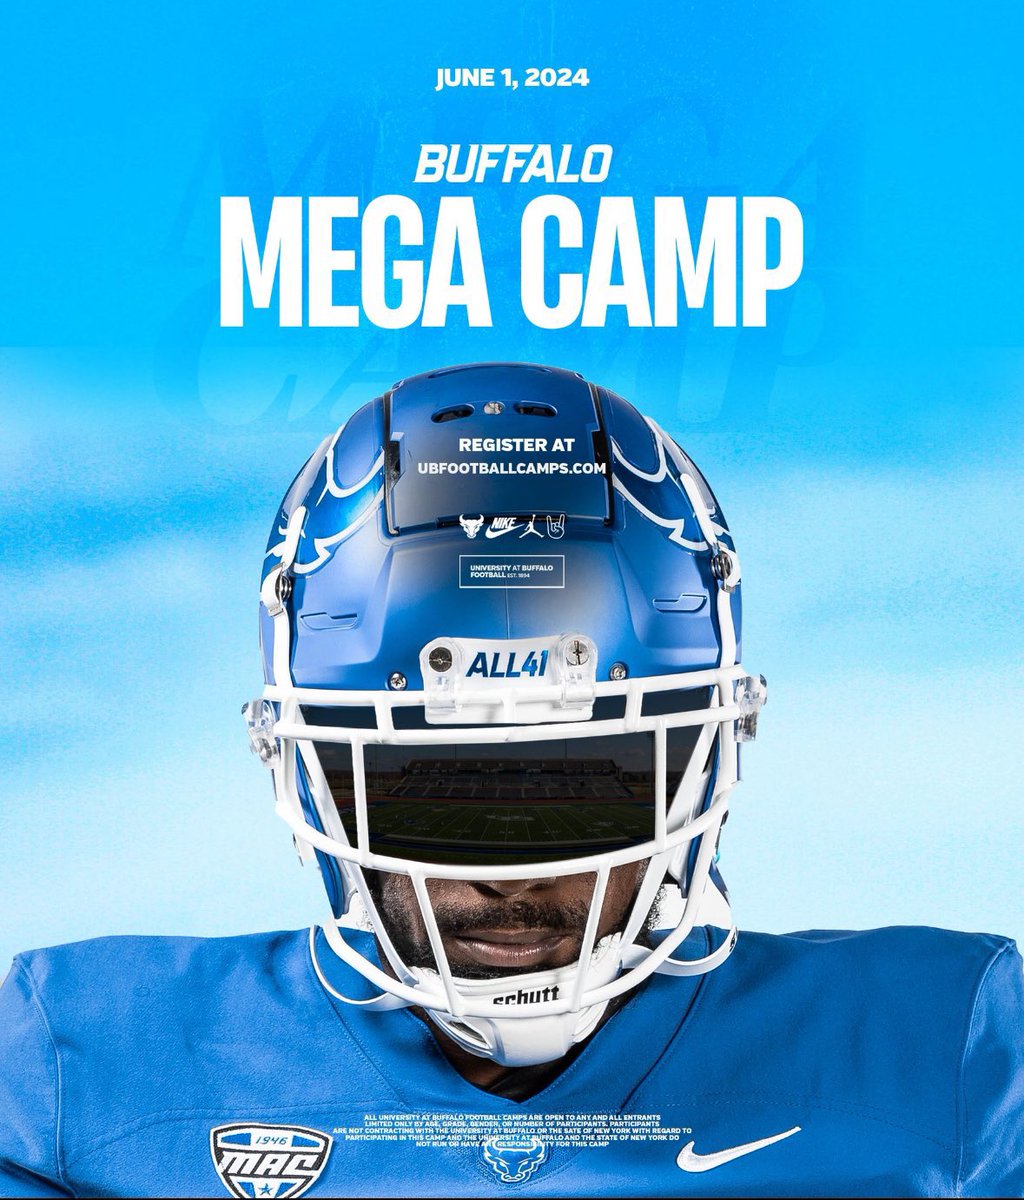 ‼️ HUGE DAY TOMORROW 🤘🏽 🦬 𝘼𝙏 𝘽 𝙐 𝙁 𝙁 𝘼 𝙇 𝙊 🔵⚪️ Over 500 campers pre registered from over 20 states, 3 countries• 100+ Canadian prospects! 🇨🇦 Going to be some great coaching, teaching & talent tomorrow! 🤘🏽 🏈 Prospects • make sure to follow our Head Coach